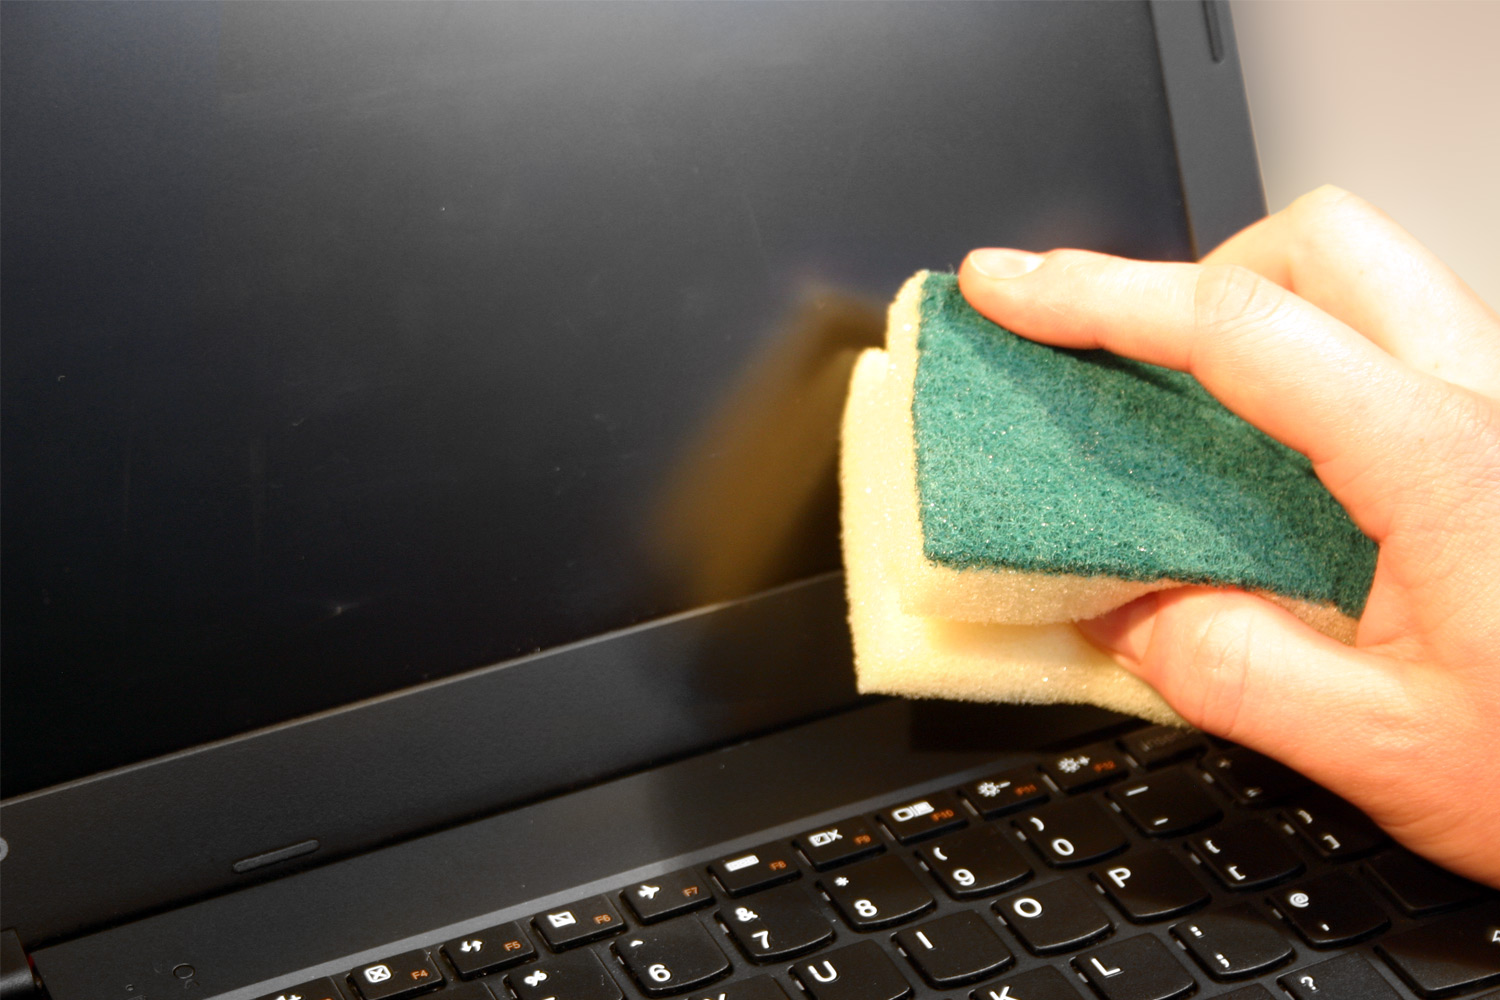 How to Clean a Laptop Screen - Sanitize Your MAC or PC Screen